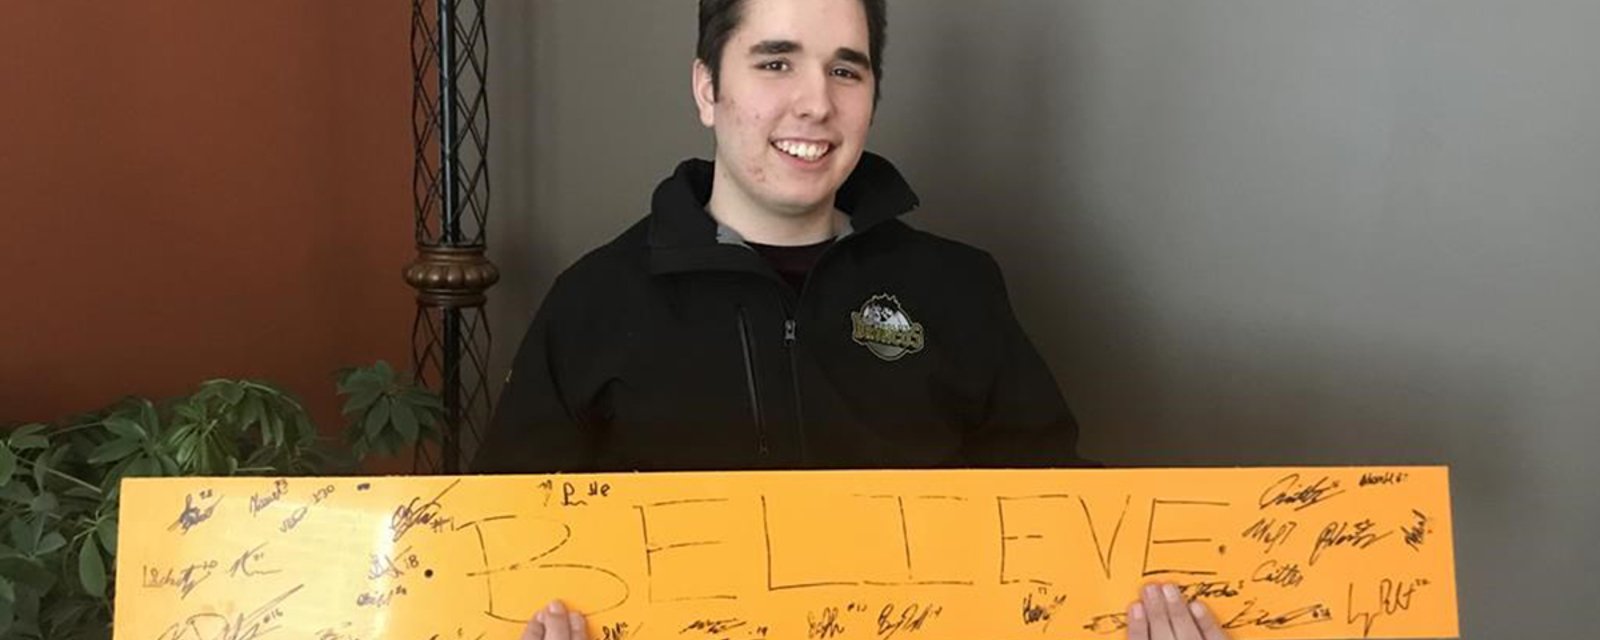 Final injured member of the Humboldt Broncos officially released from hospital